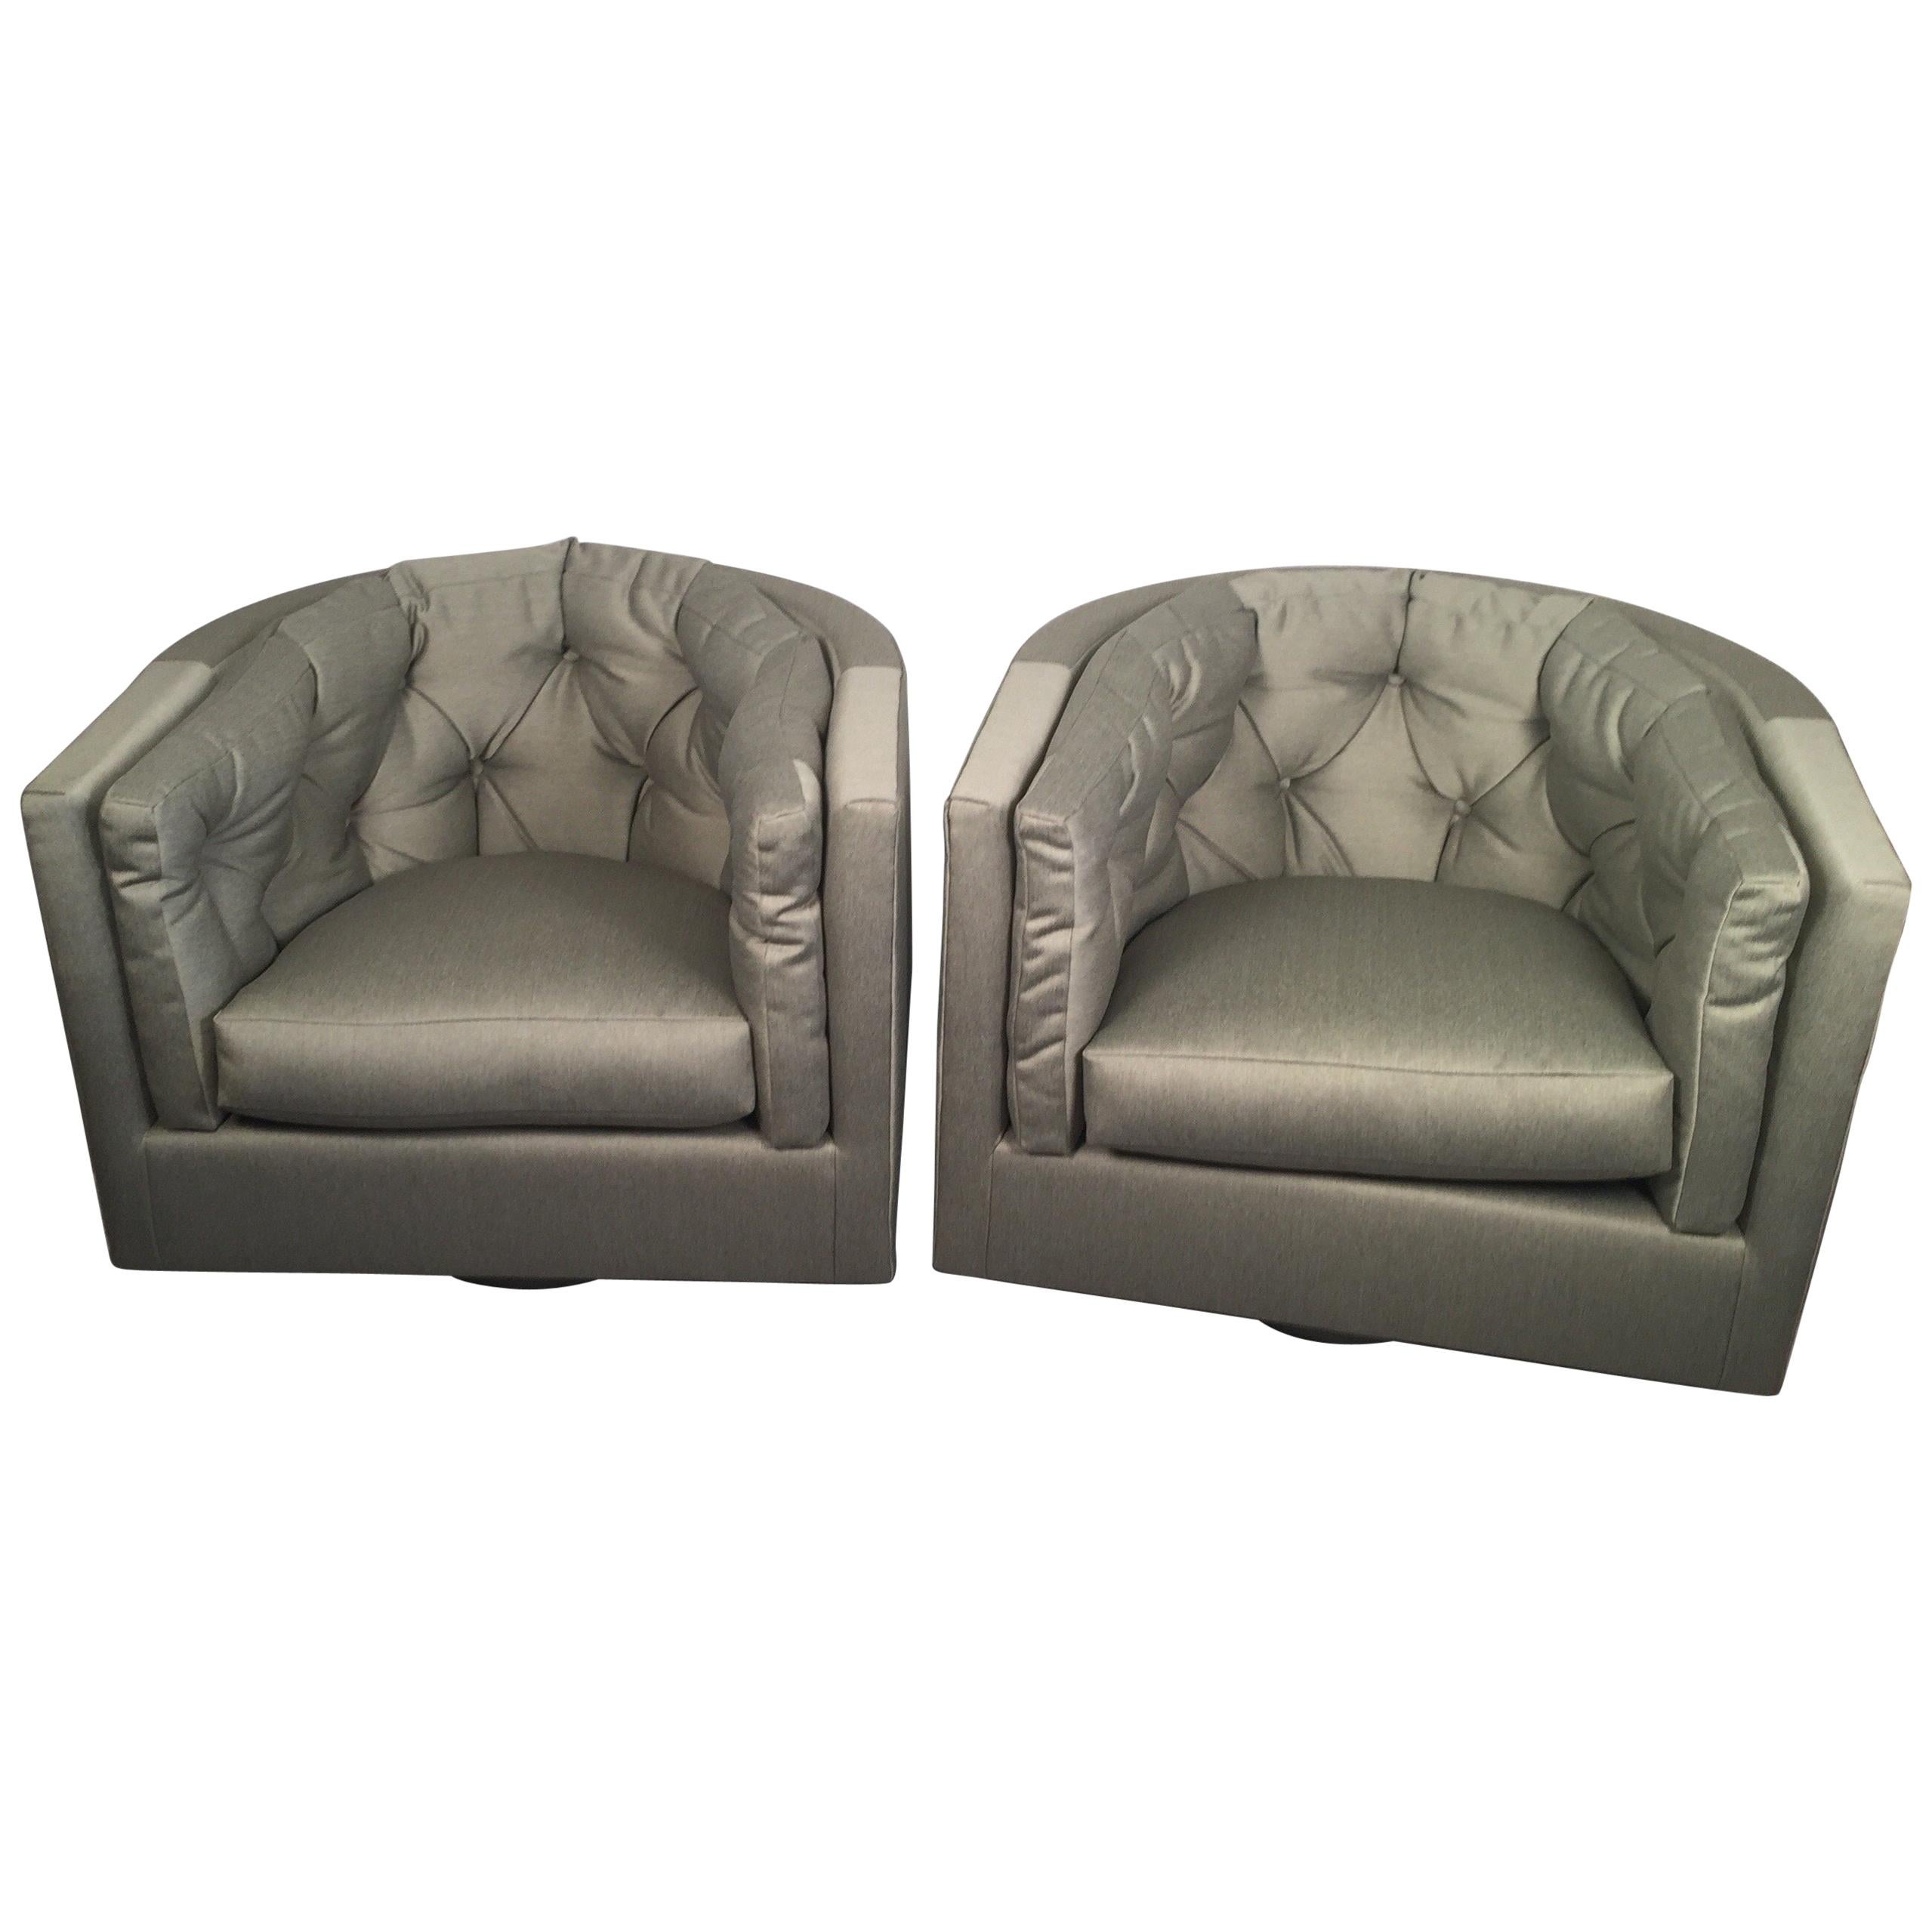 Pair of Swiveling Barrel-Back Chairs